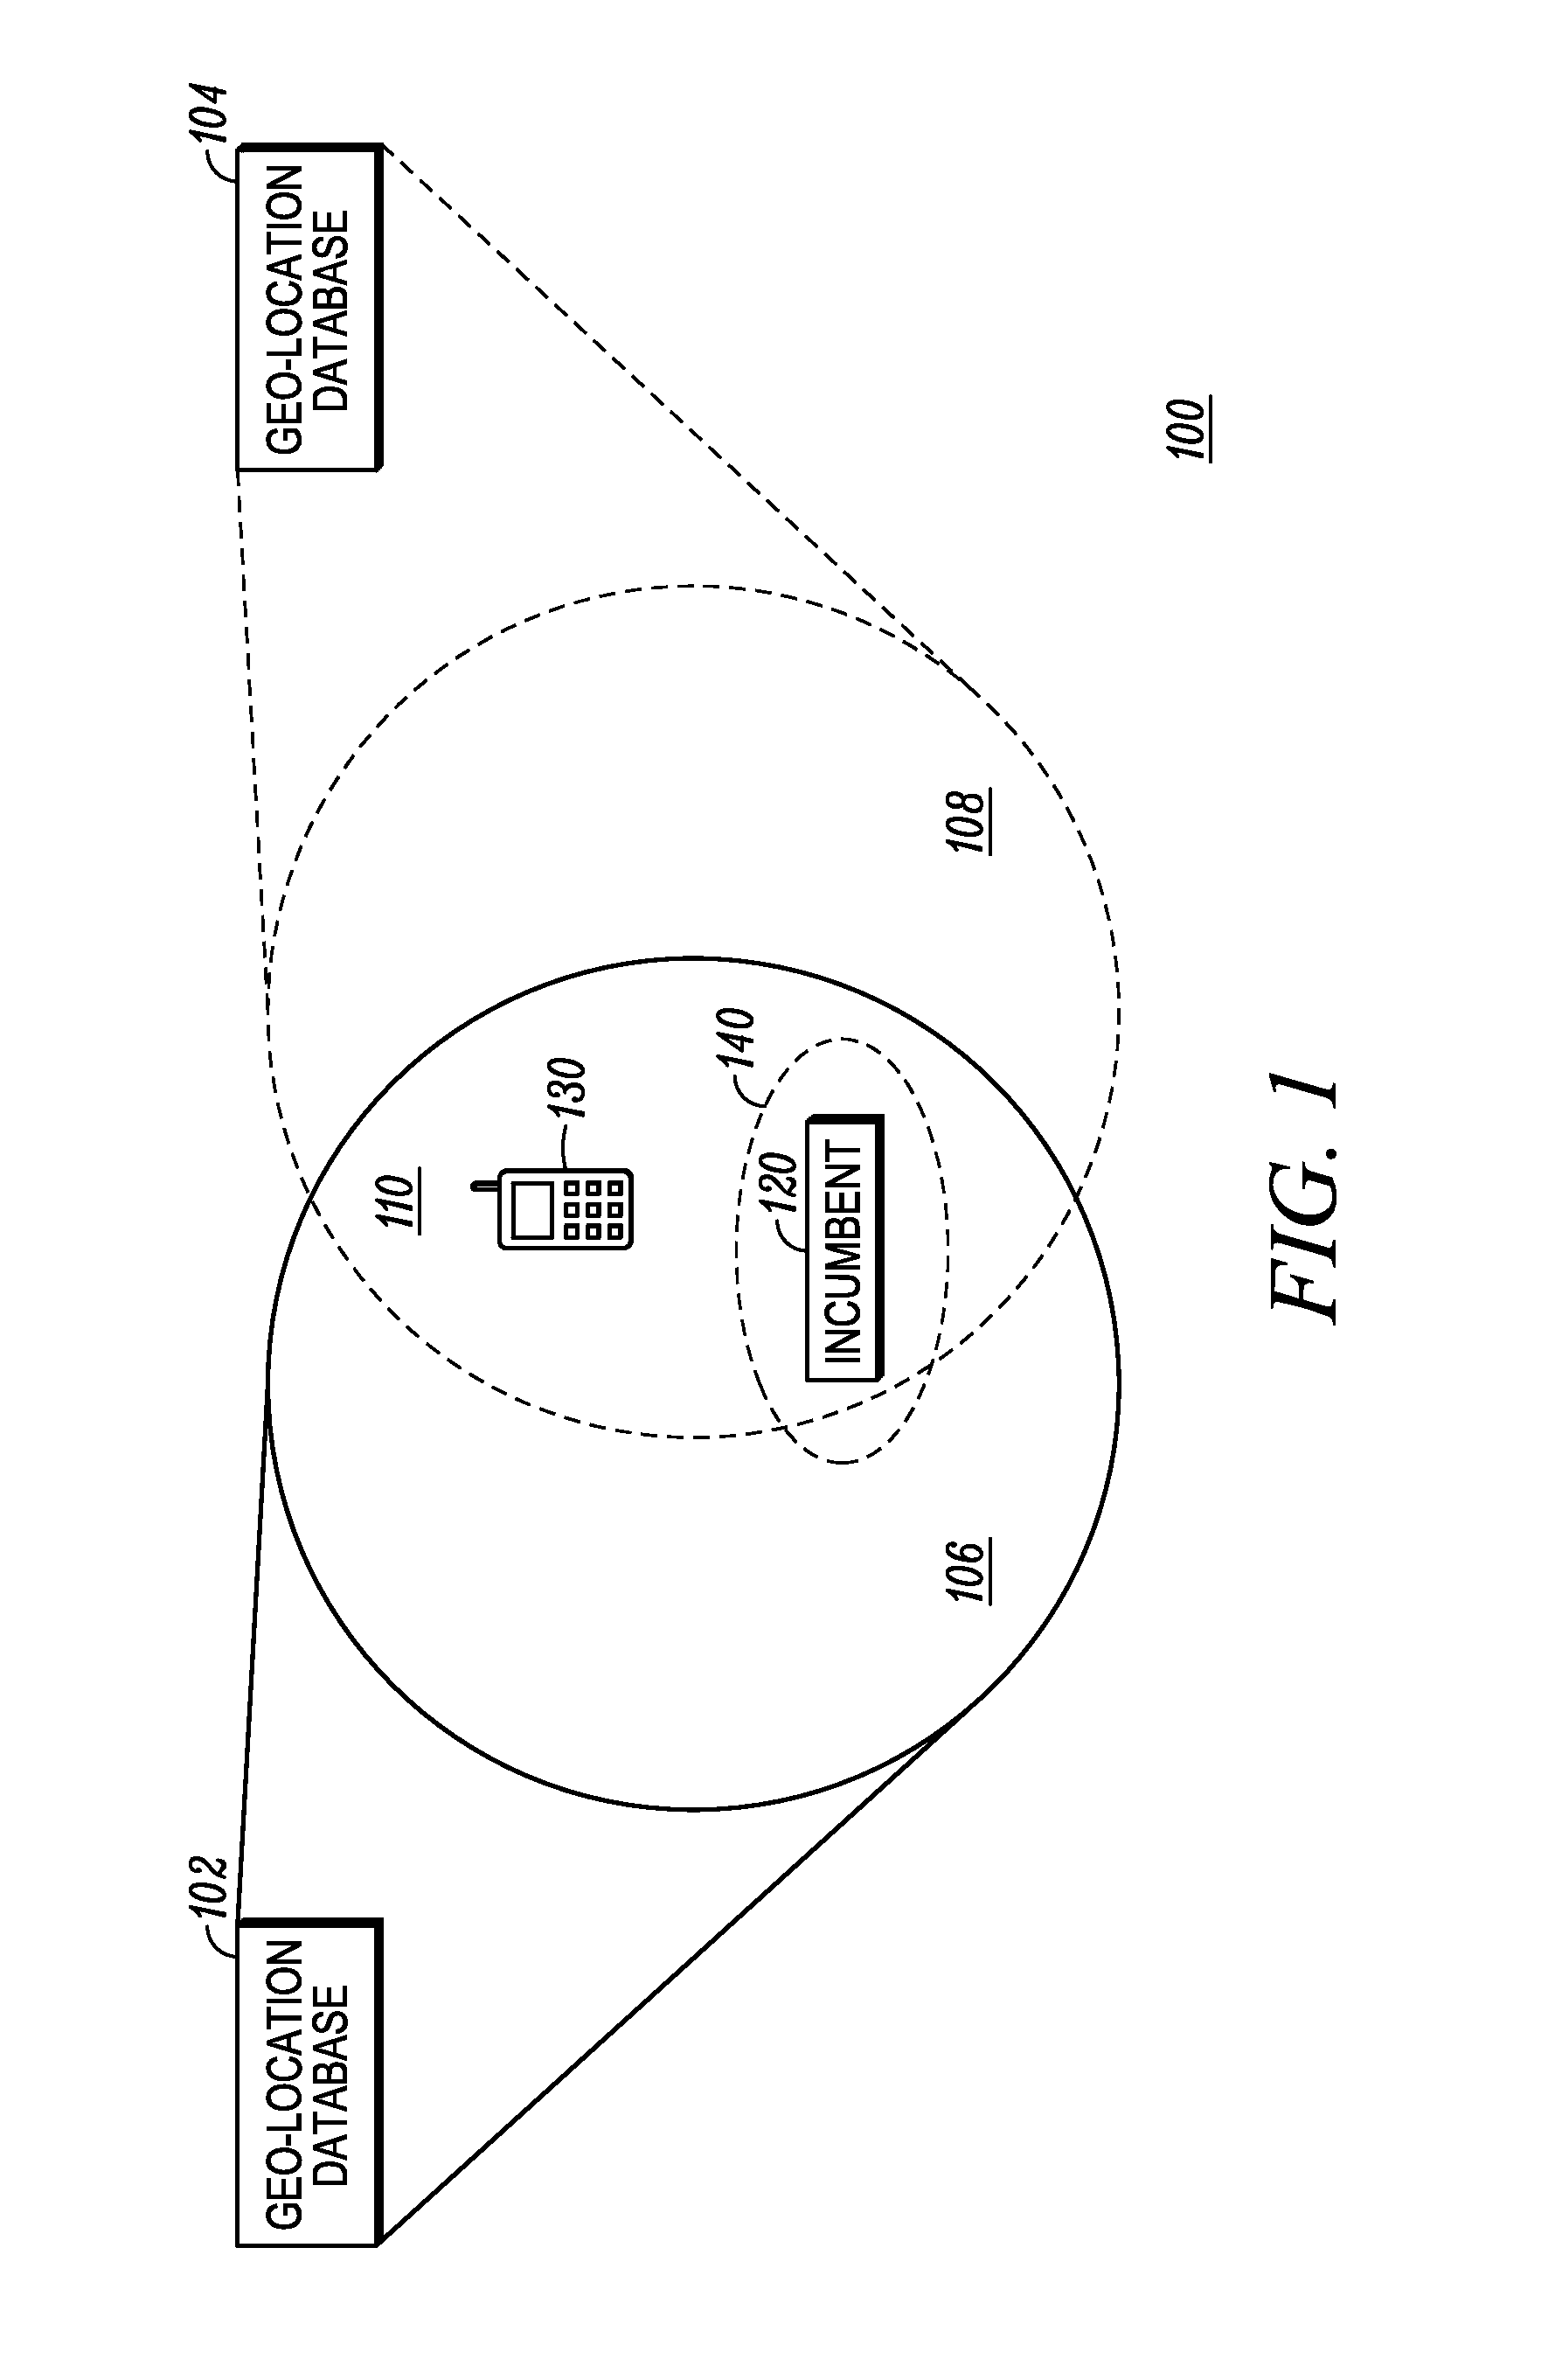 Method and apparatus for automatically ensuring consistency among multiple spectrum databases